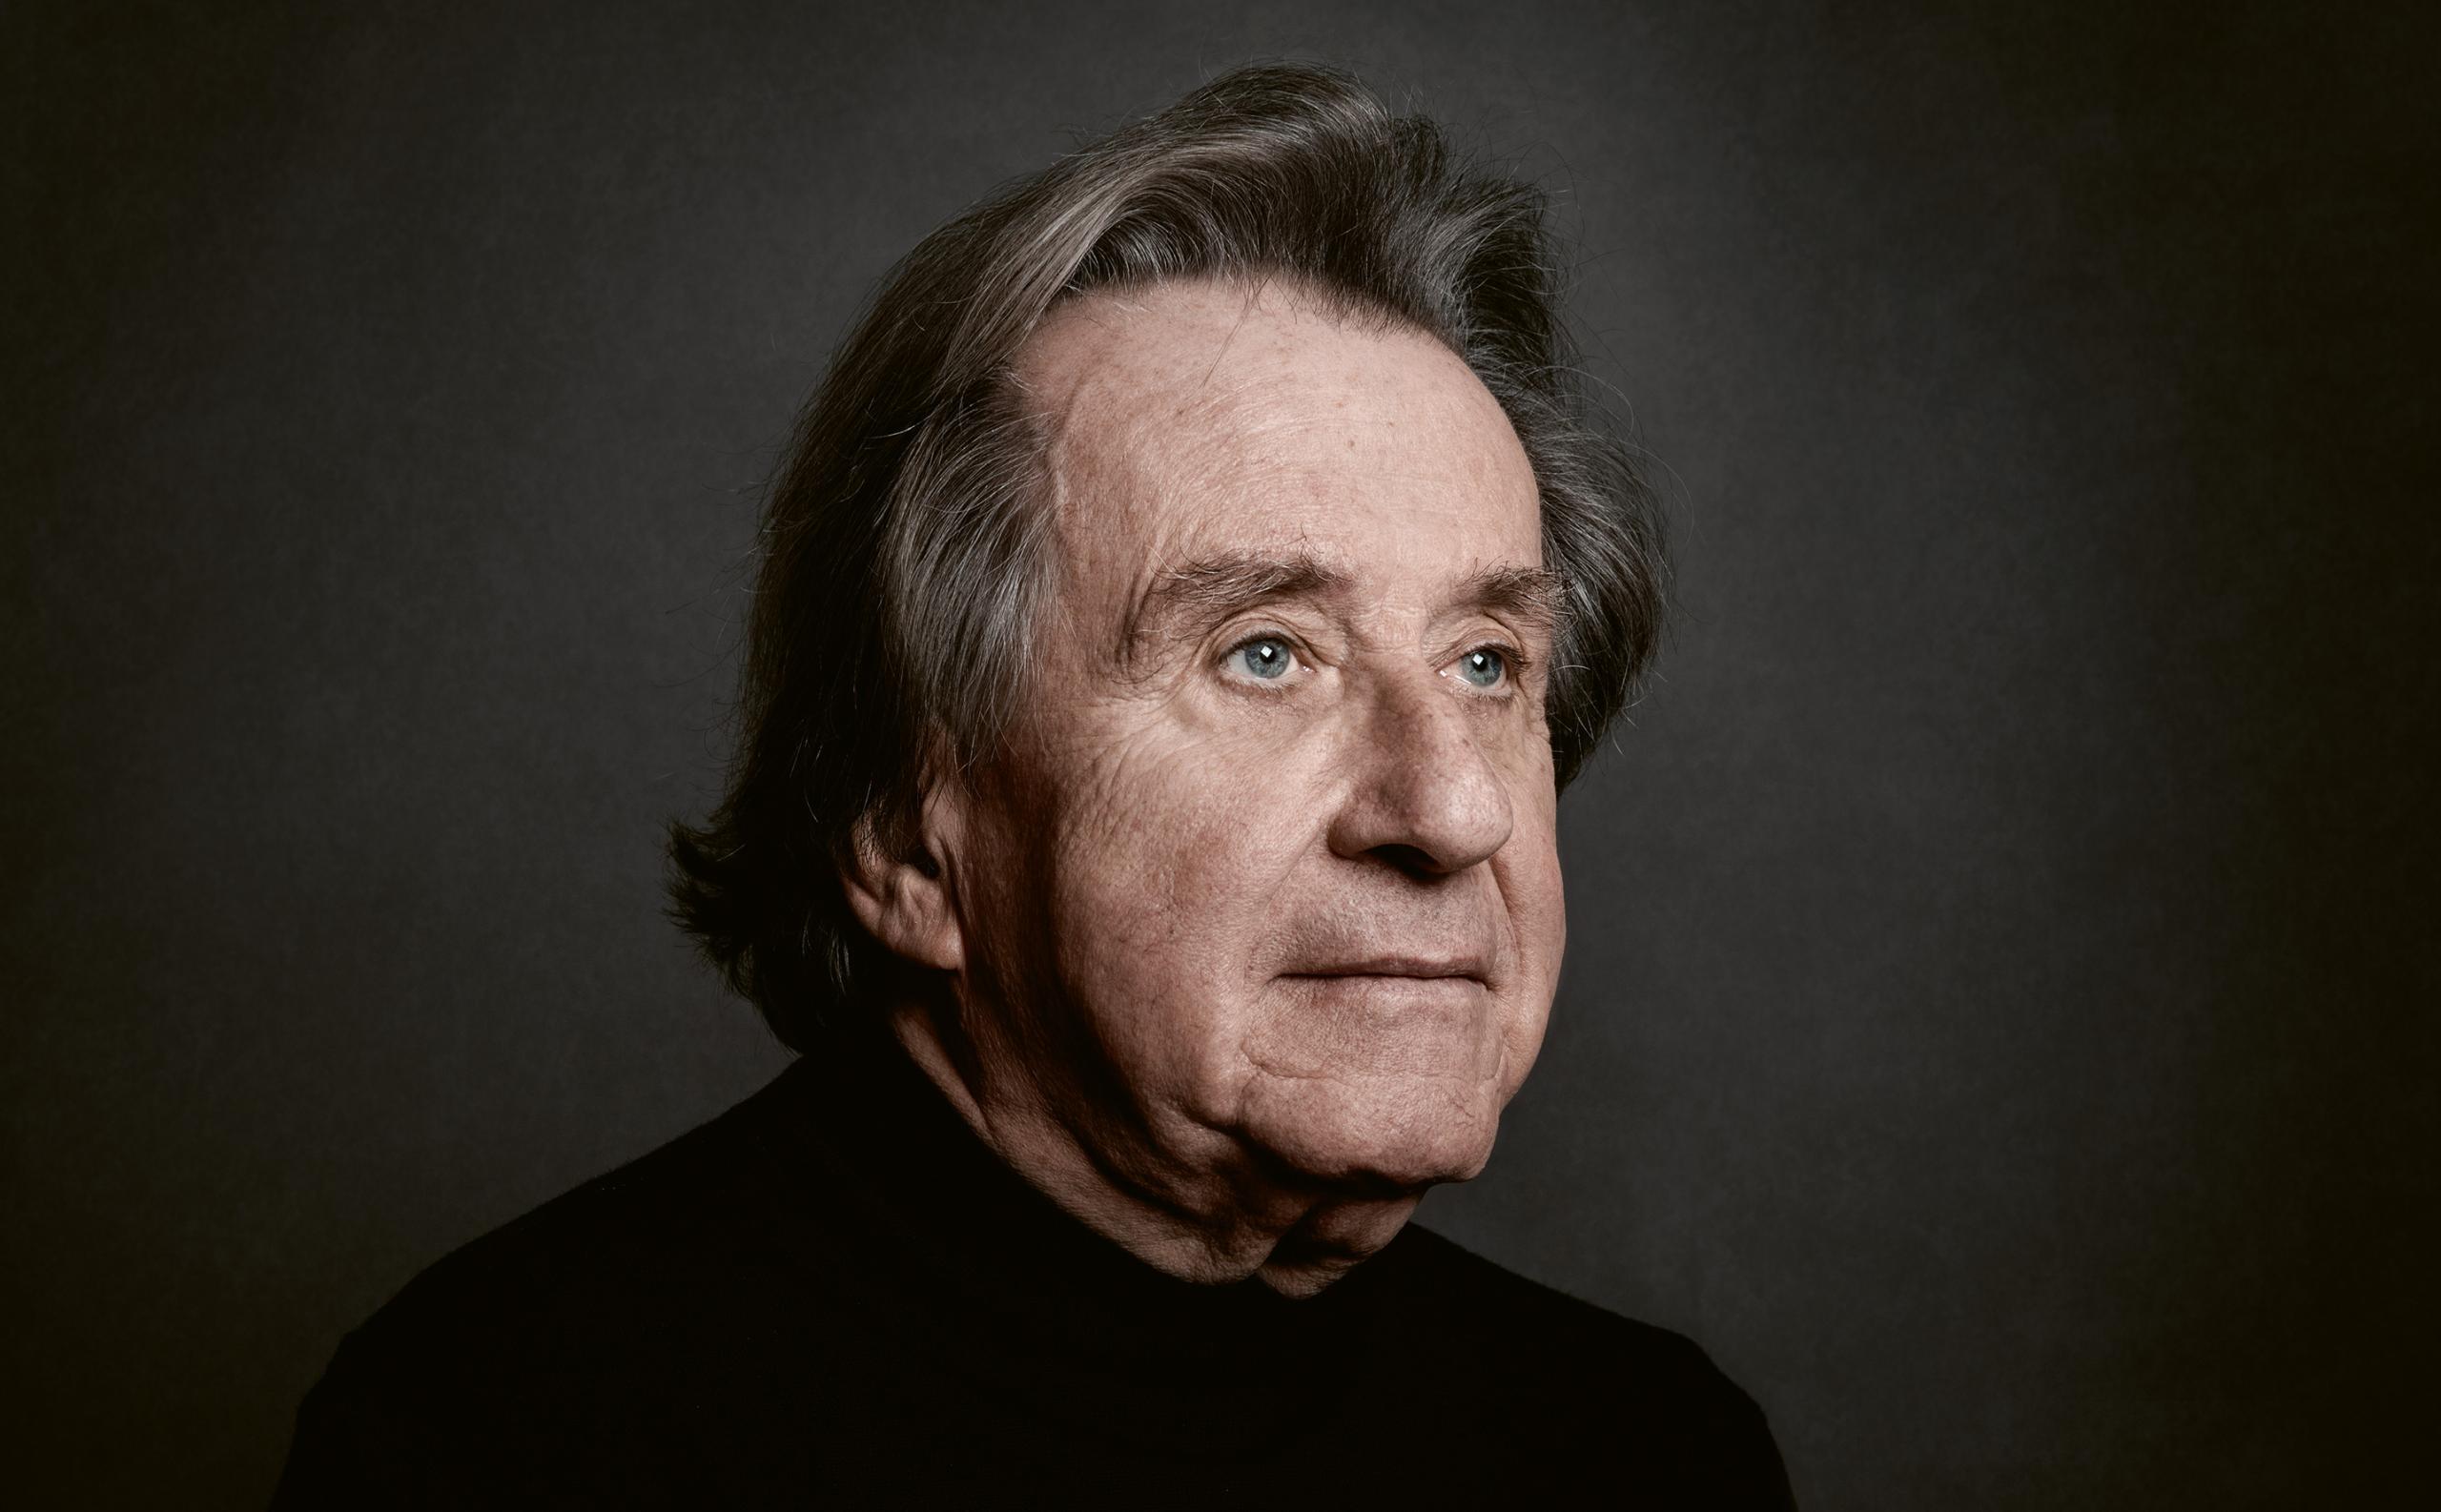 Portrait of the pianist Rudolf Buchbinder. He is seen in side profile and depicted against a dark grey background